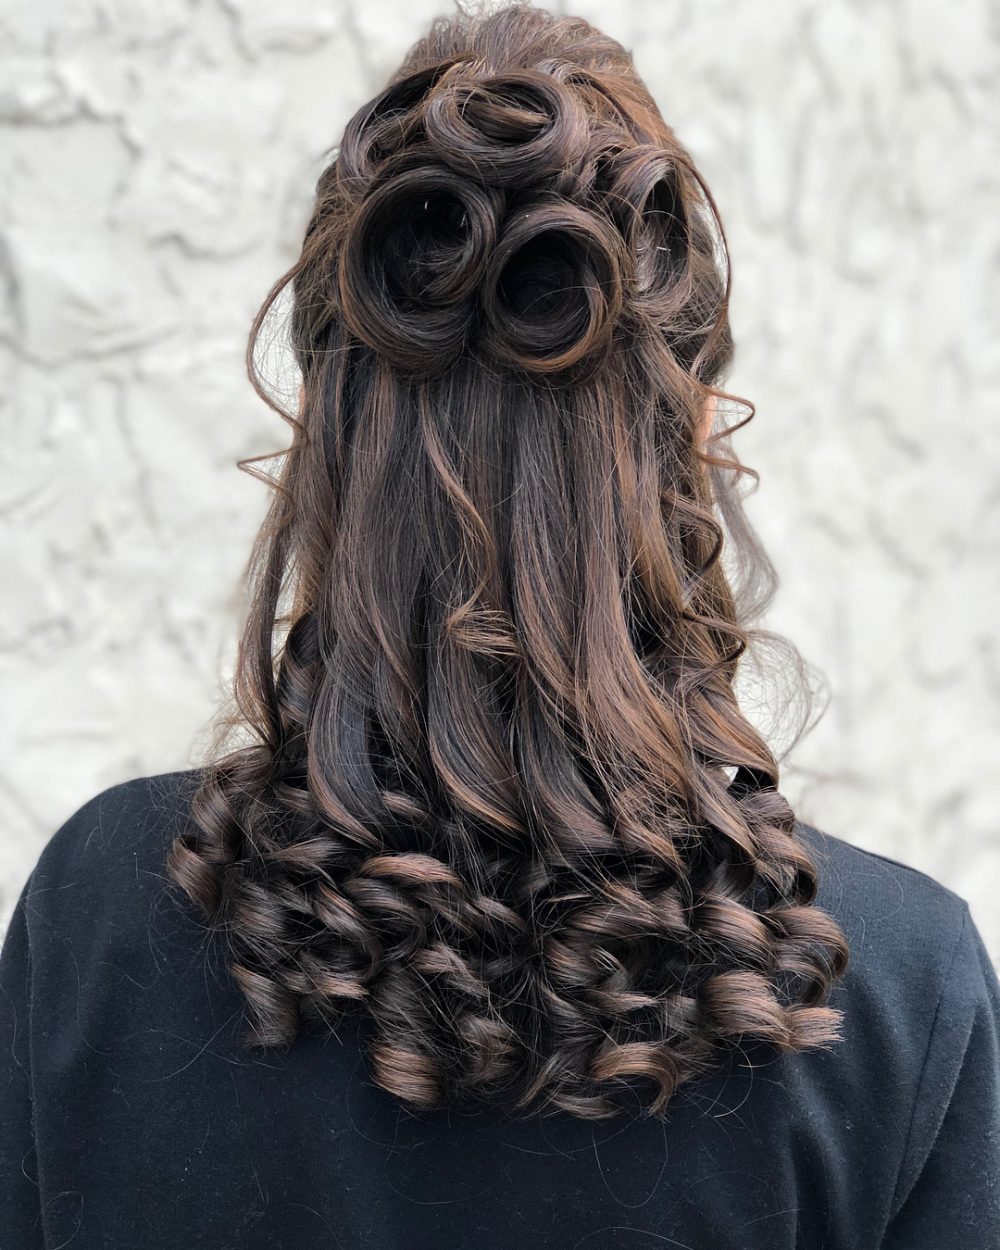 Premium Photo | Bridal or prom hairstyle girl back view